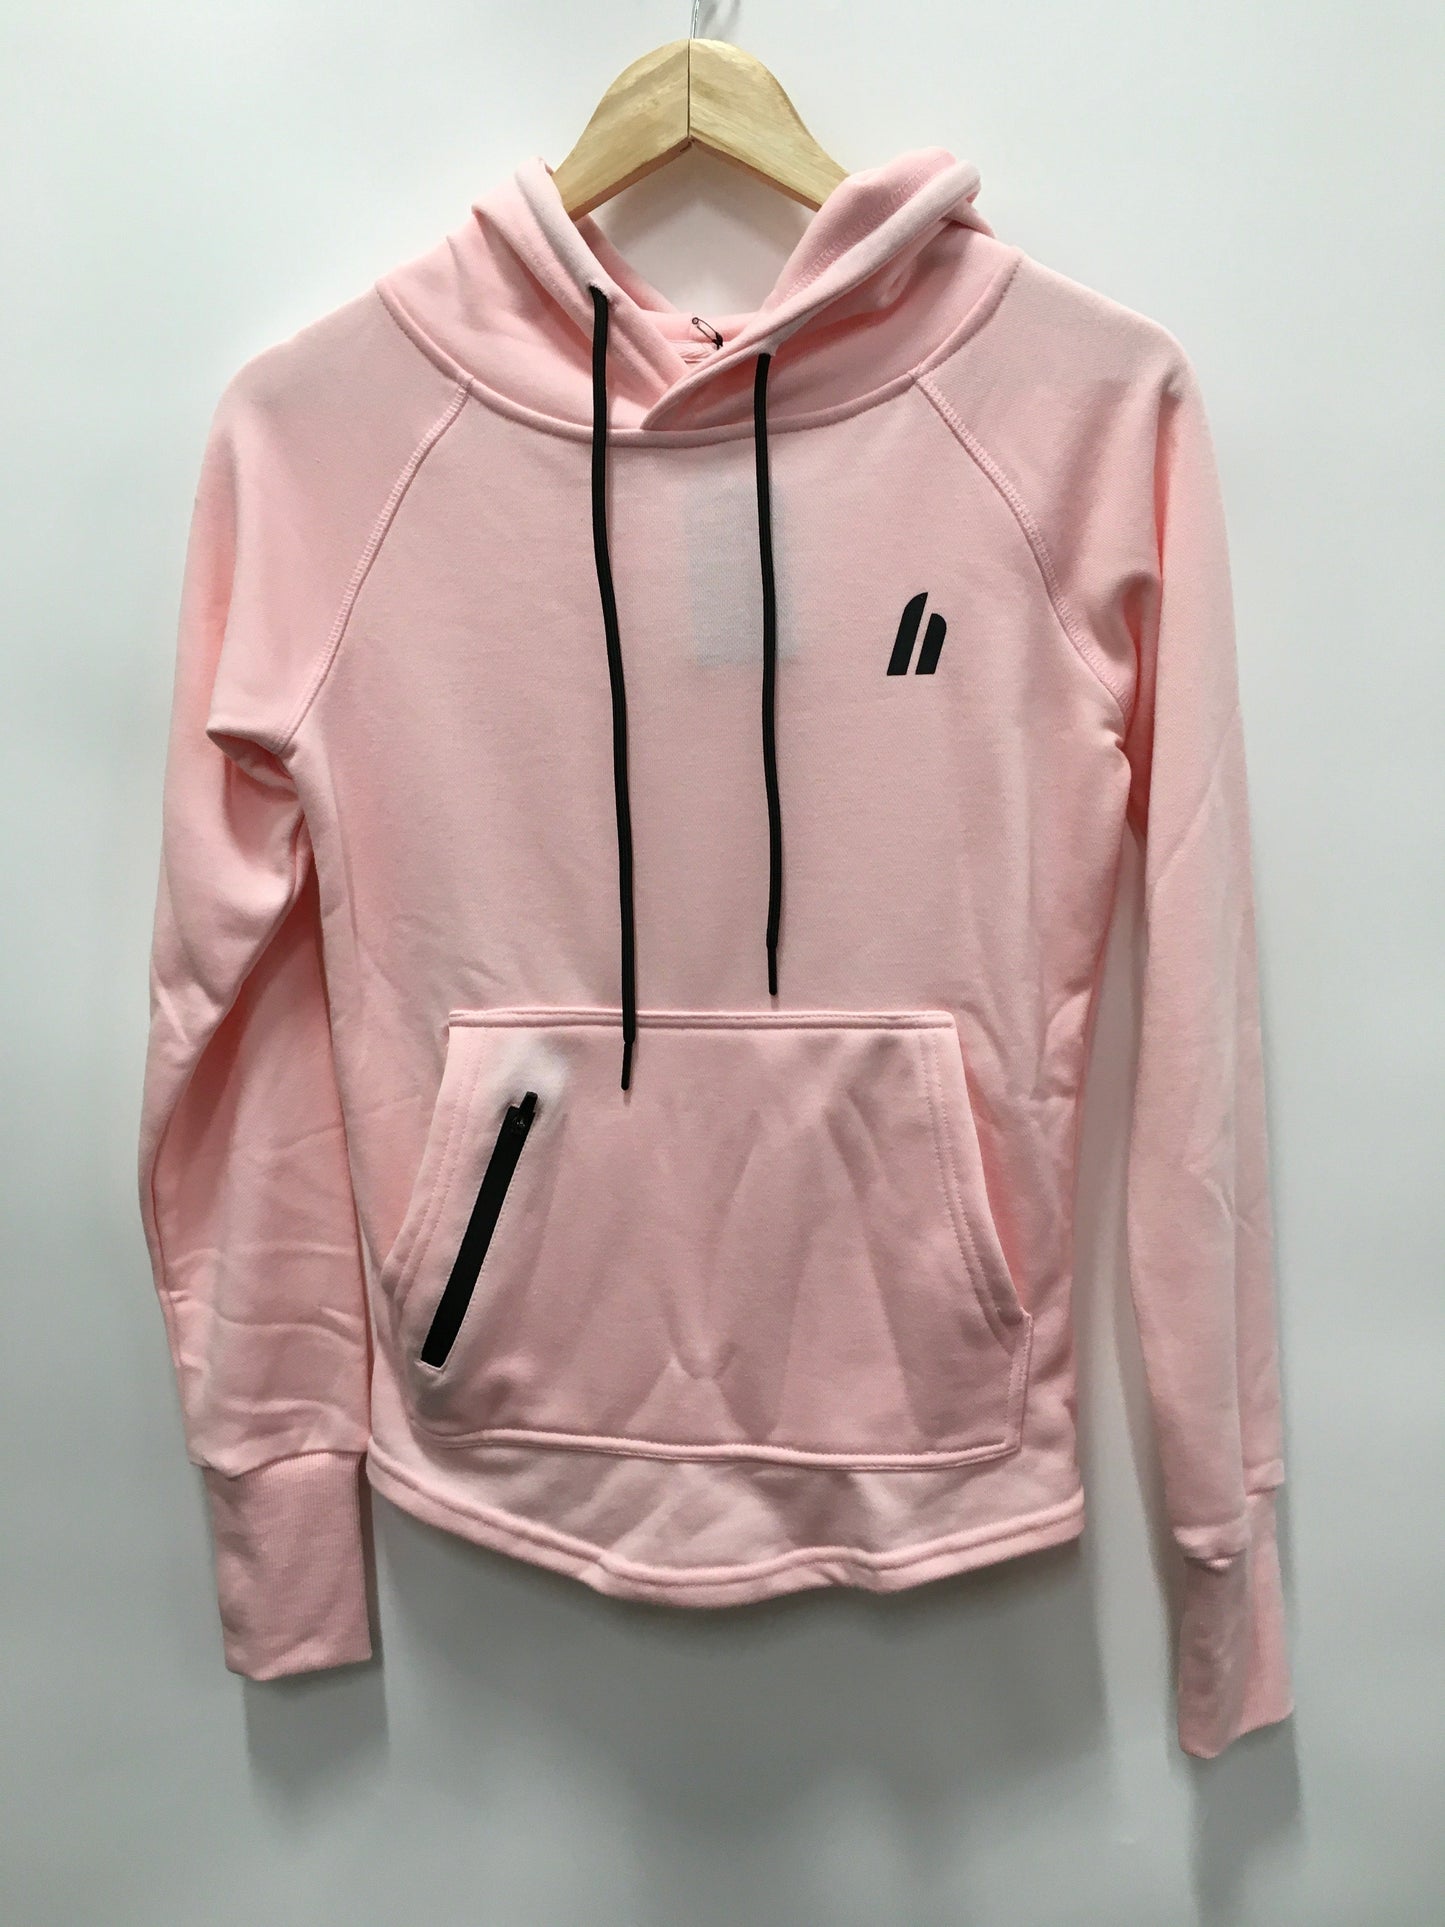 Pink Athletic Sweatshirt Hoodie Clothes Mentor, Size Xs